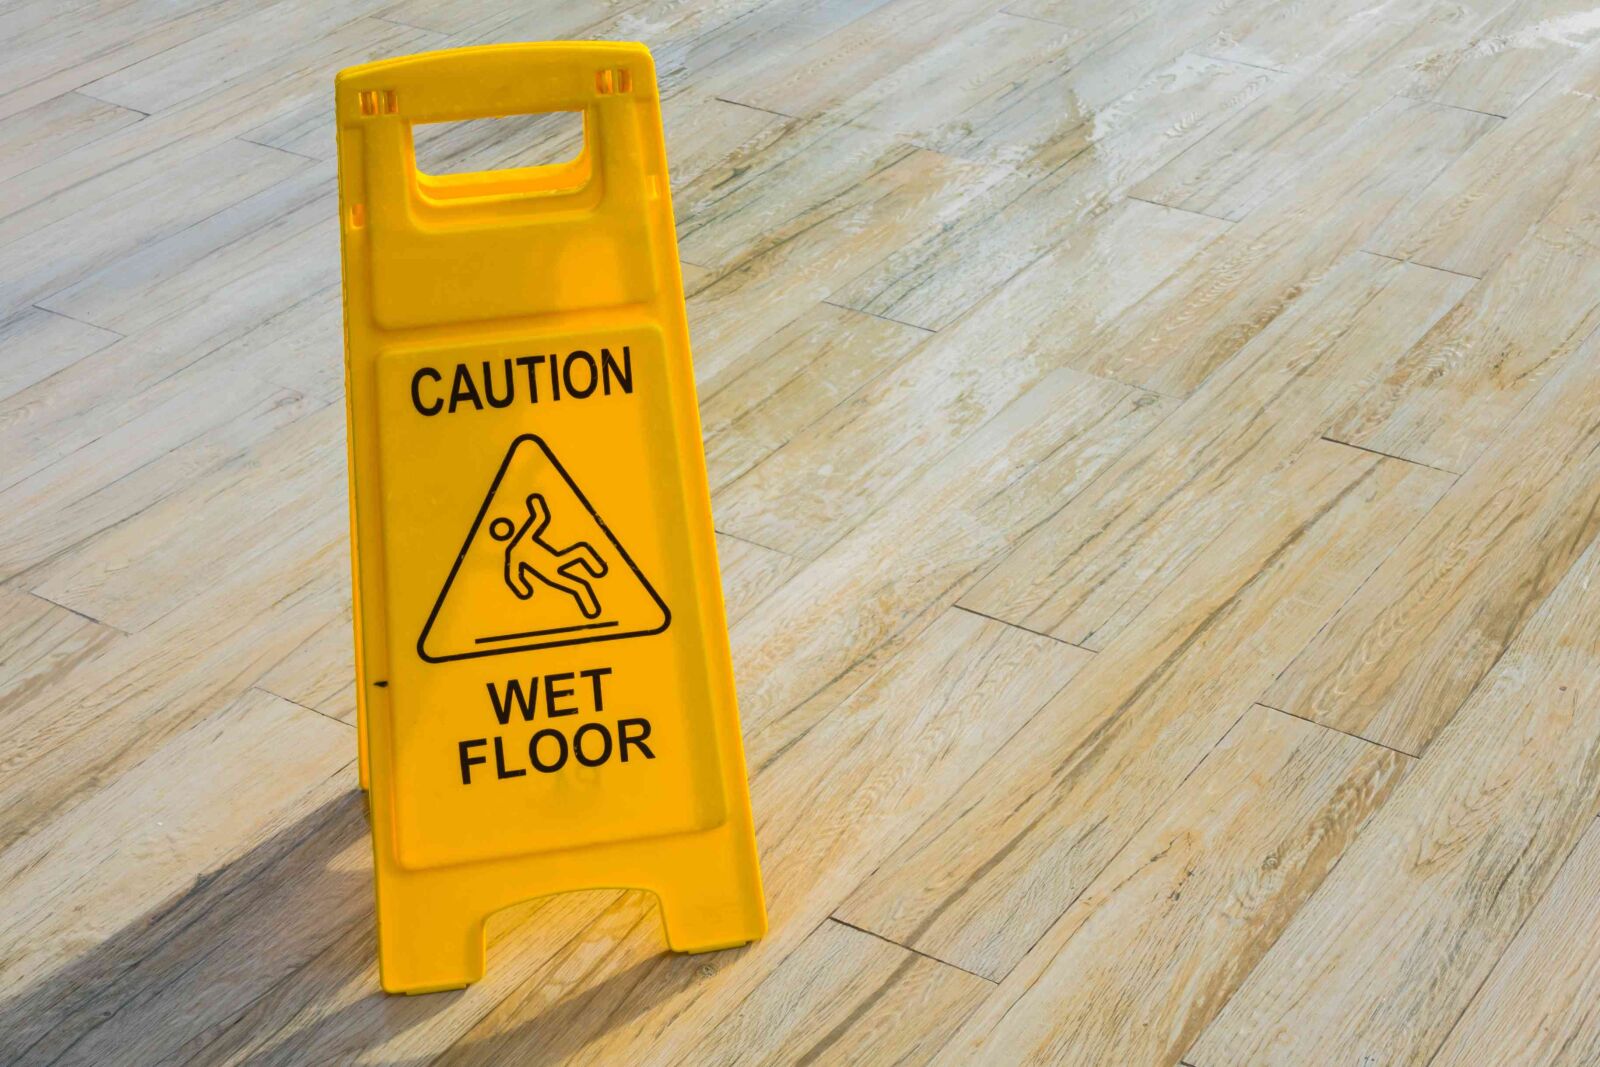 Slip and Fall Accident Report Guide